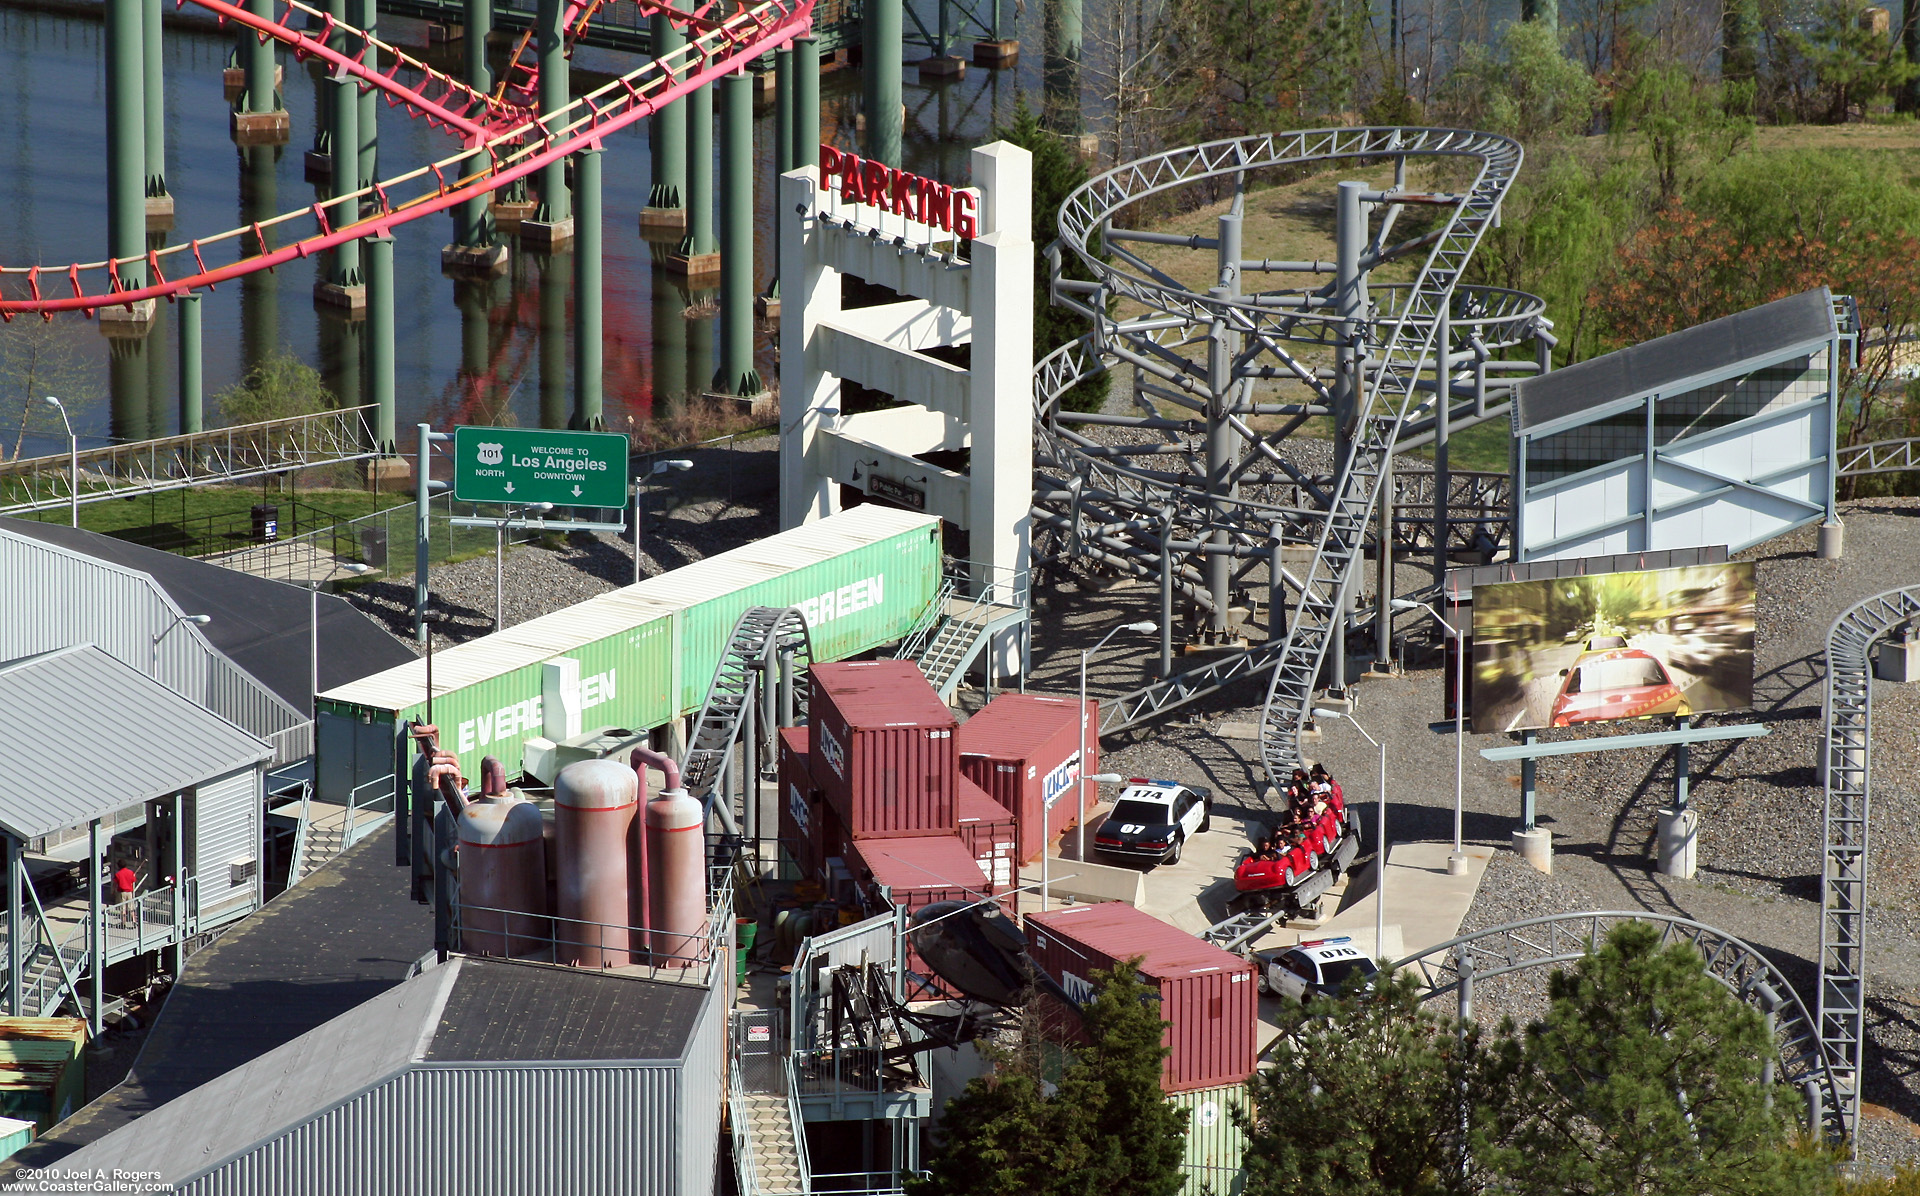 Aerial view of police cars and a helicopter. Linear Induction Motors are used on this roller coaster.